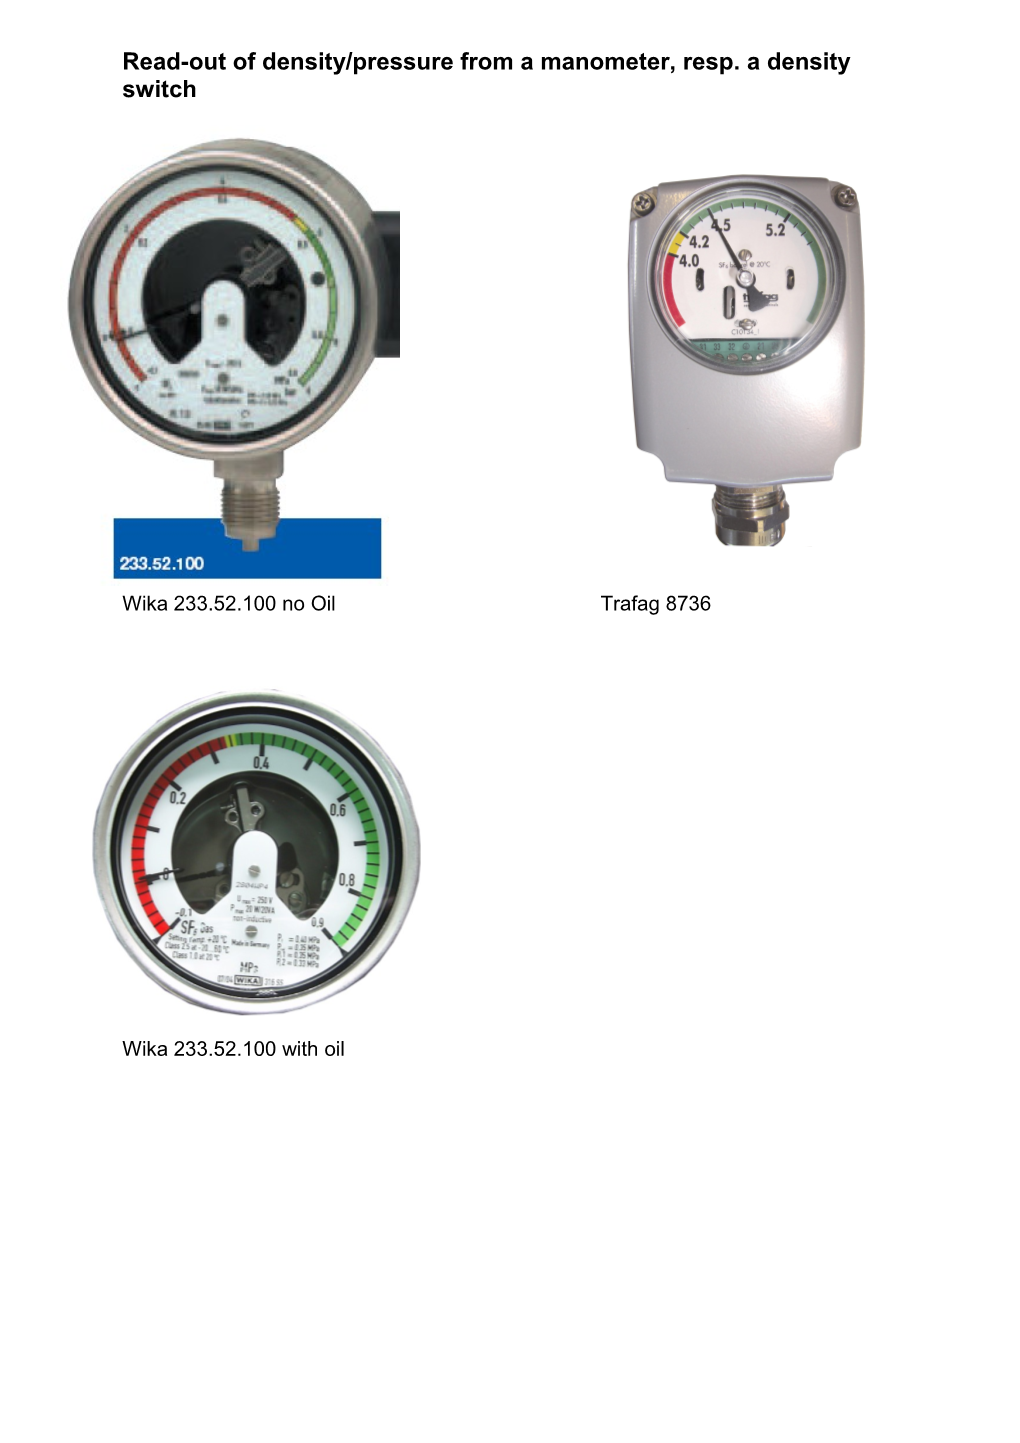 Read-Out of Density/Pressure from a Manometer, Resp. a Density Switch